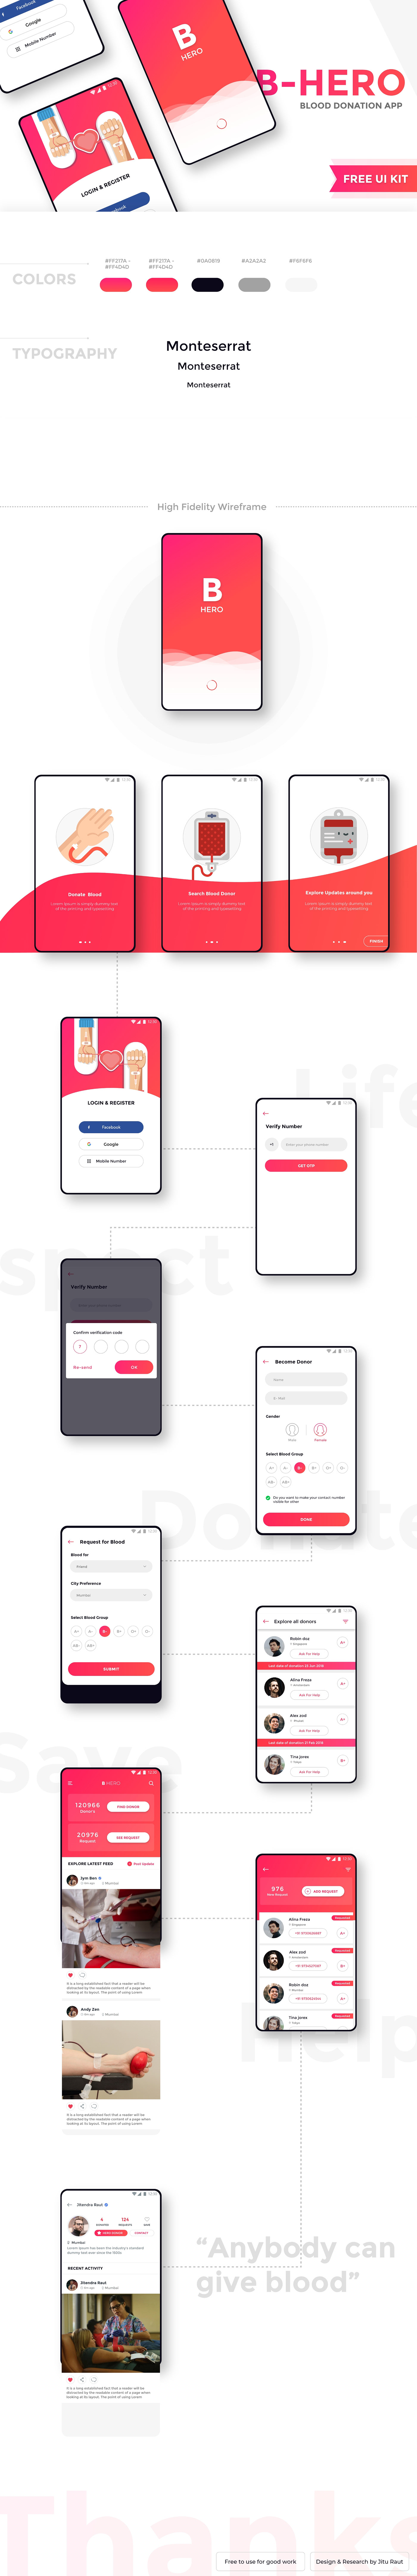 #user interaction #free UI ux freebie 2018uitrends blood donation app material design Clean Design userinteraction